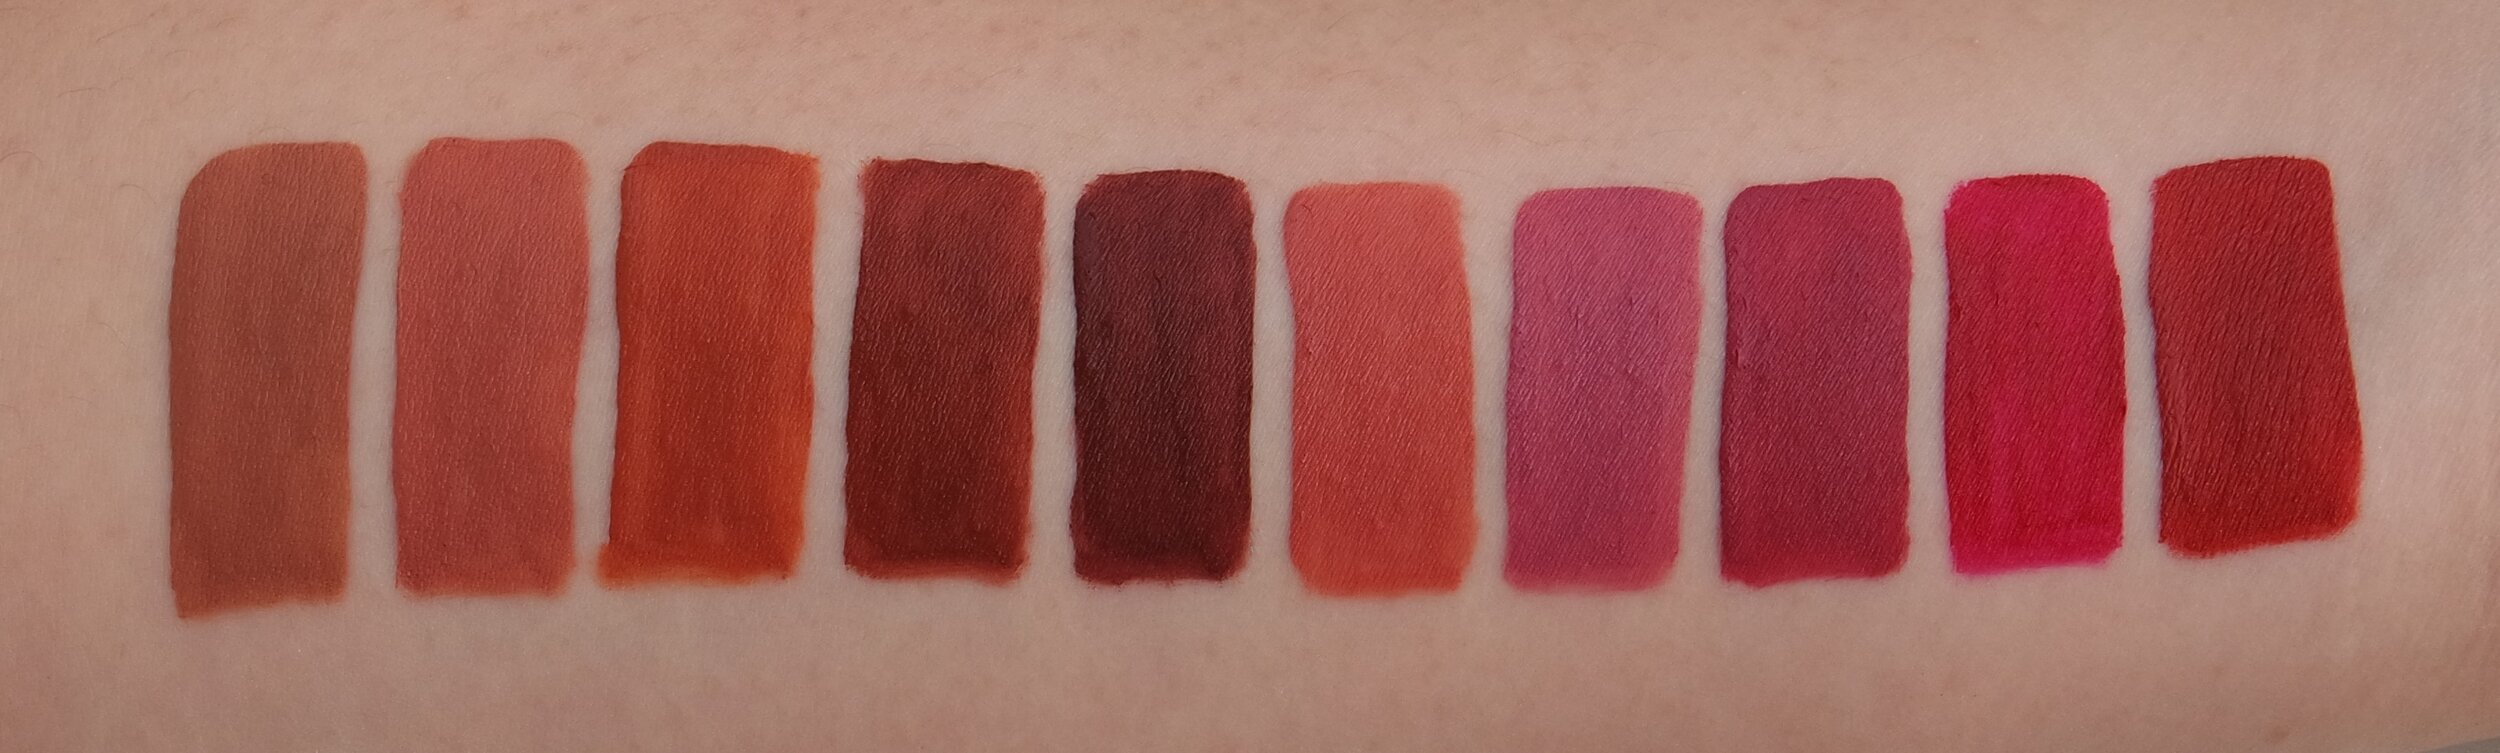 Maybelline Ink Swatches.JPG